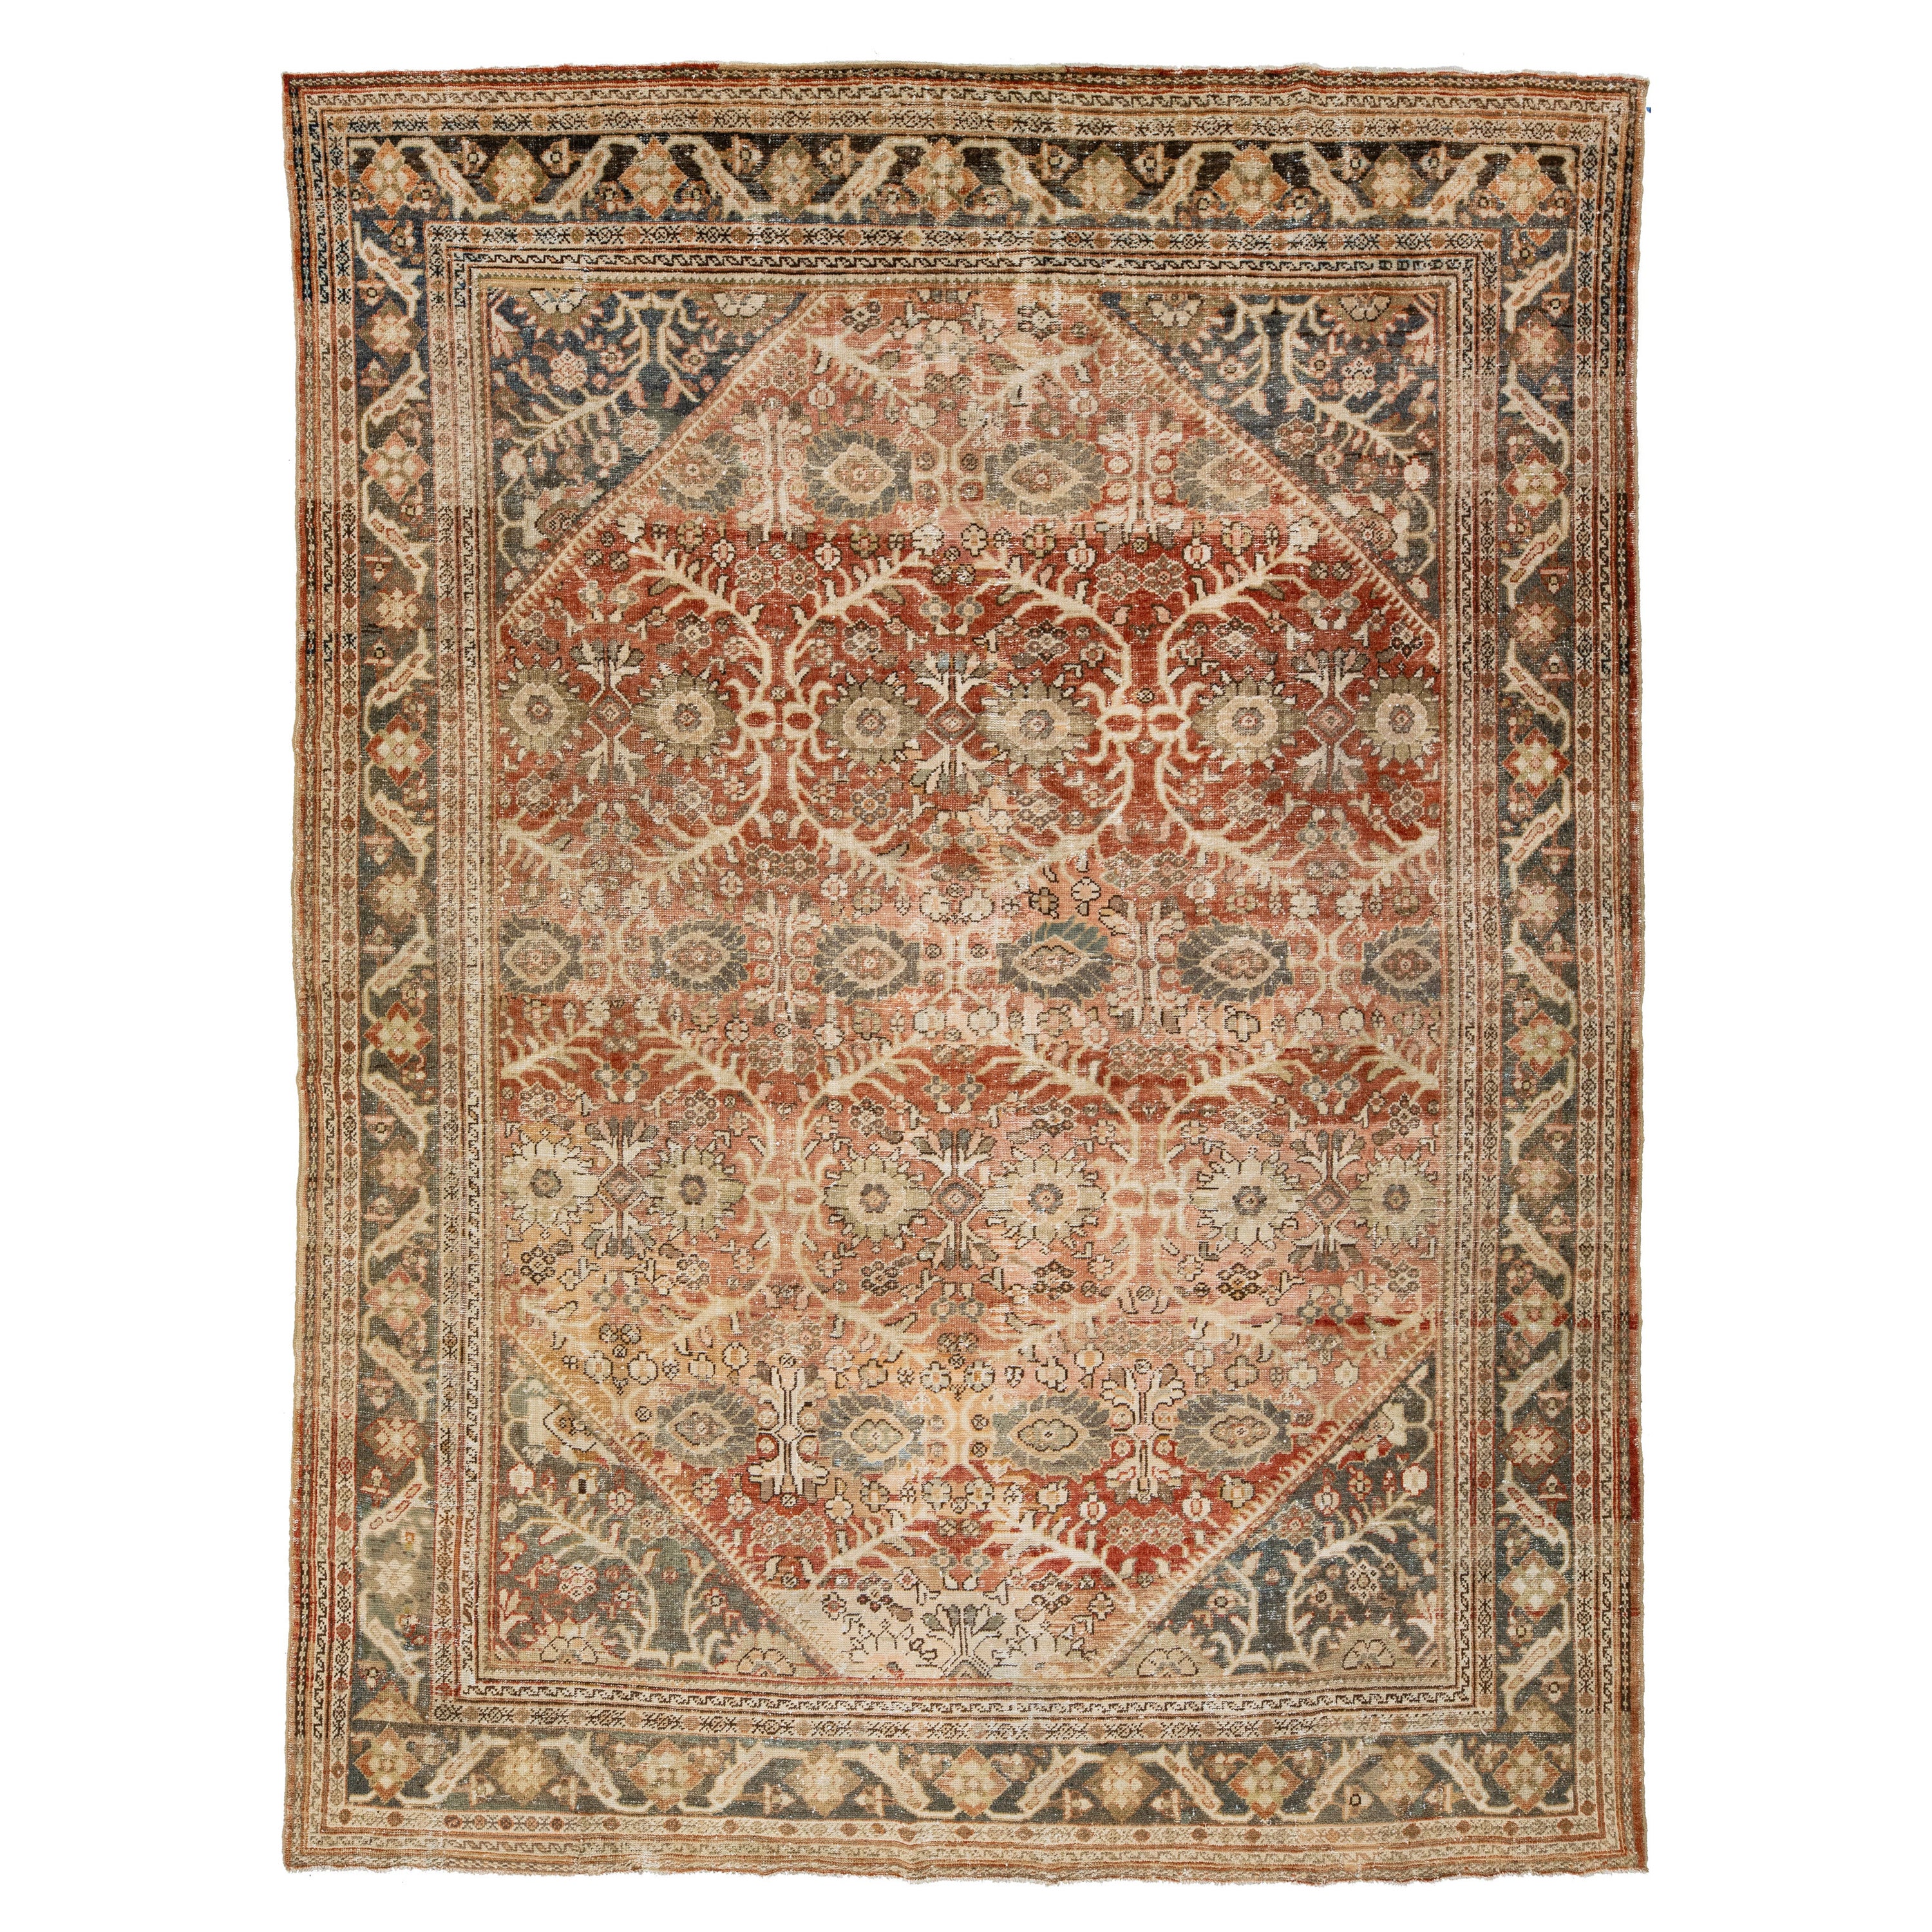 10 x 13 Antique Mahal Wool Rug In Rust Color with Allover Motif For Sale